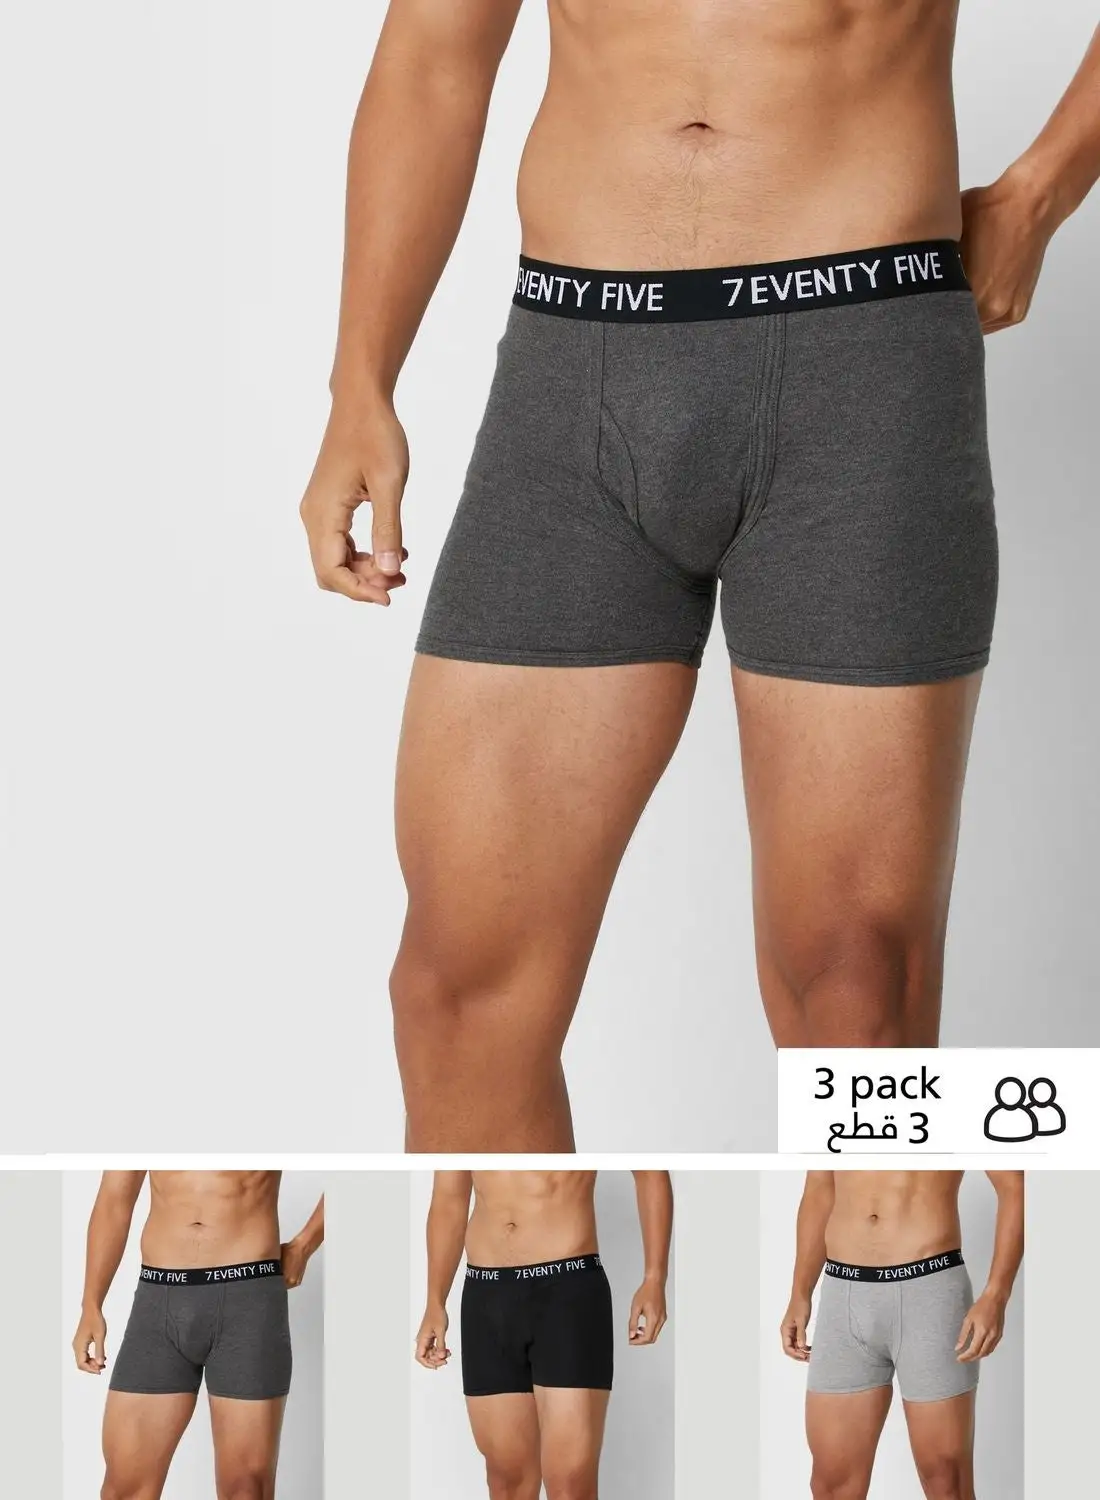 Seventy Five 3 Pack Waist Band Trunks With Antibacterial Finish